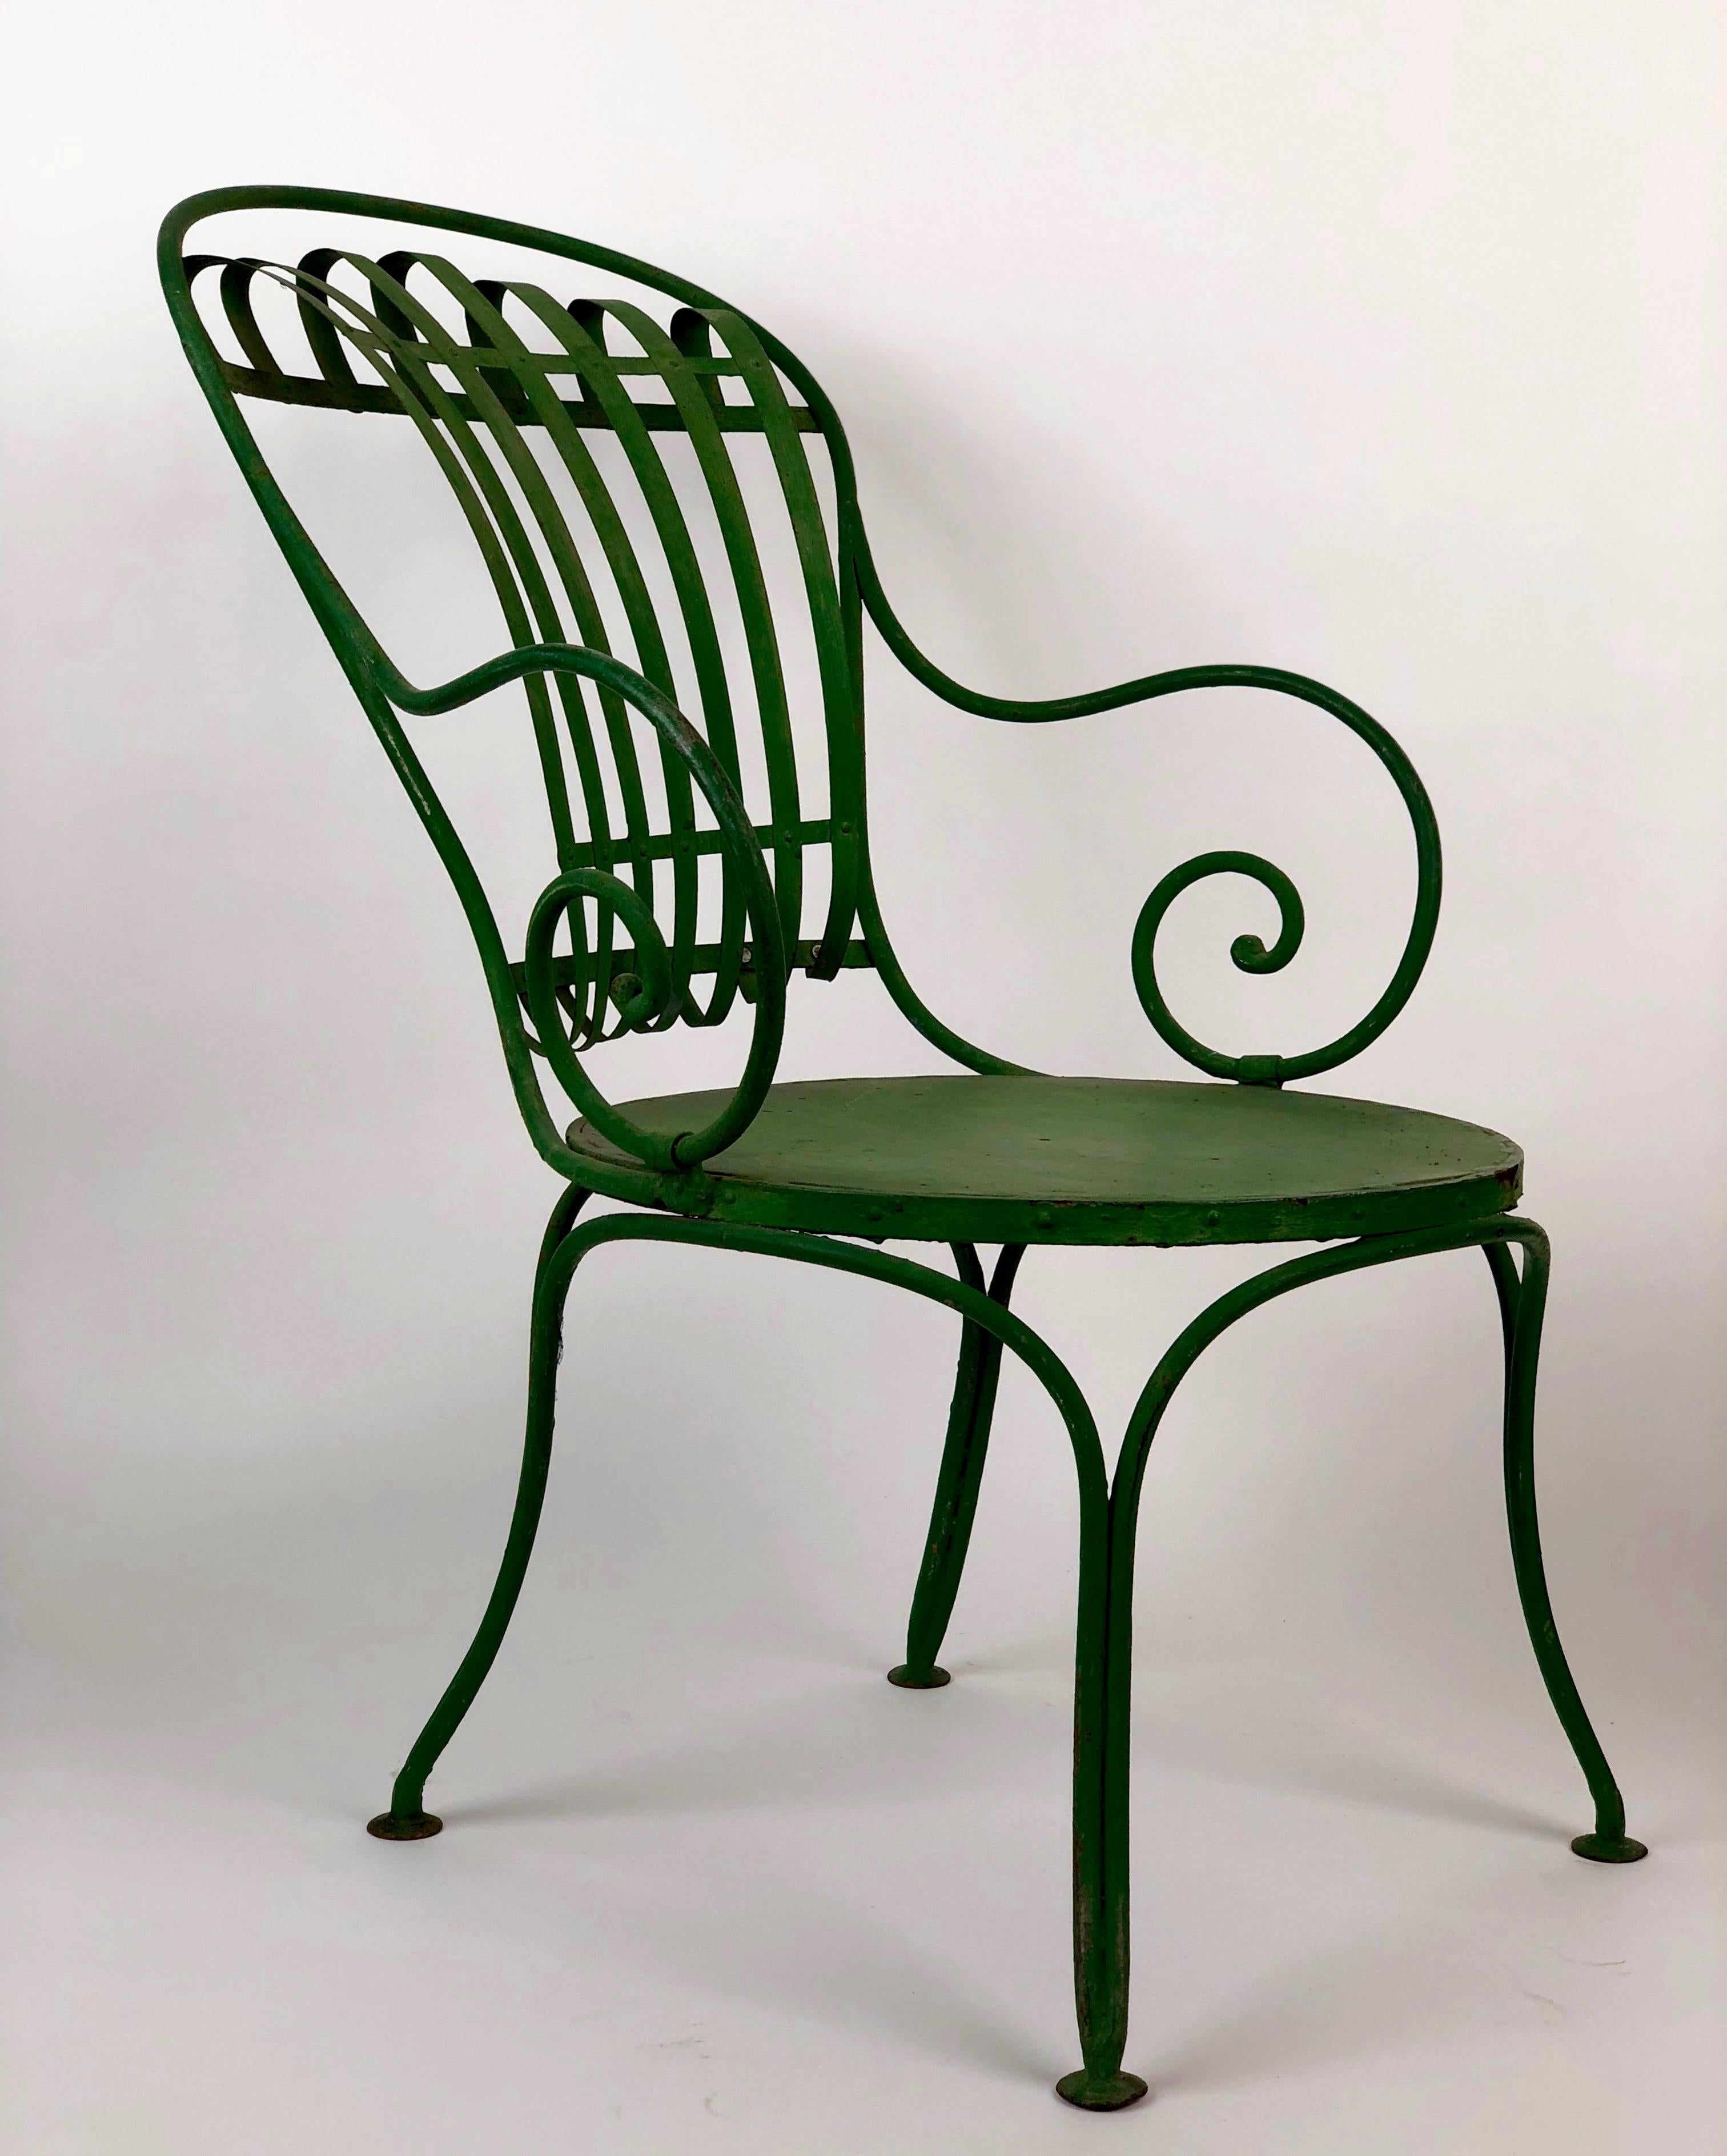 Welded Pair of 1930s French Garden Chairs from Francois Carre